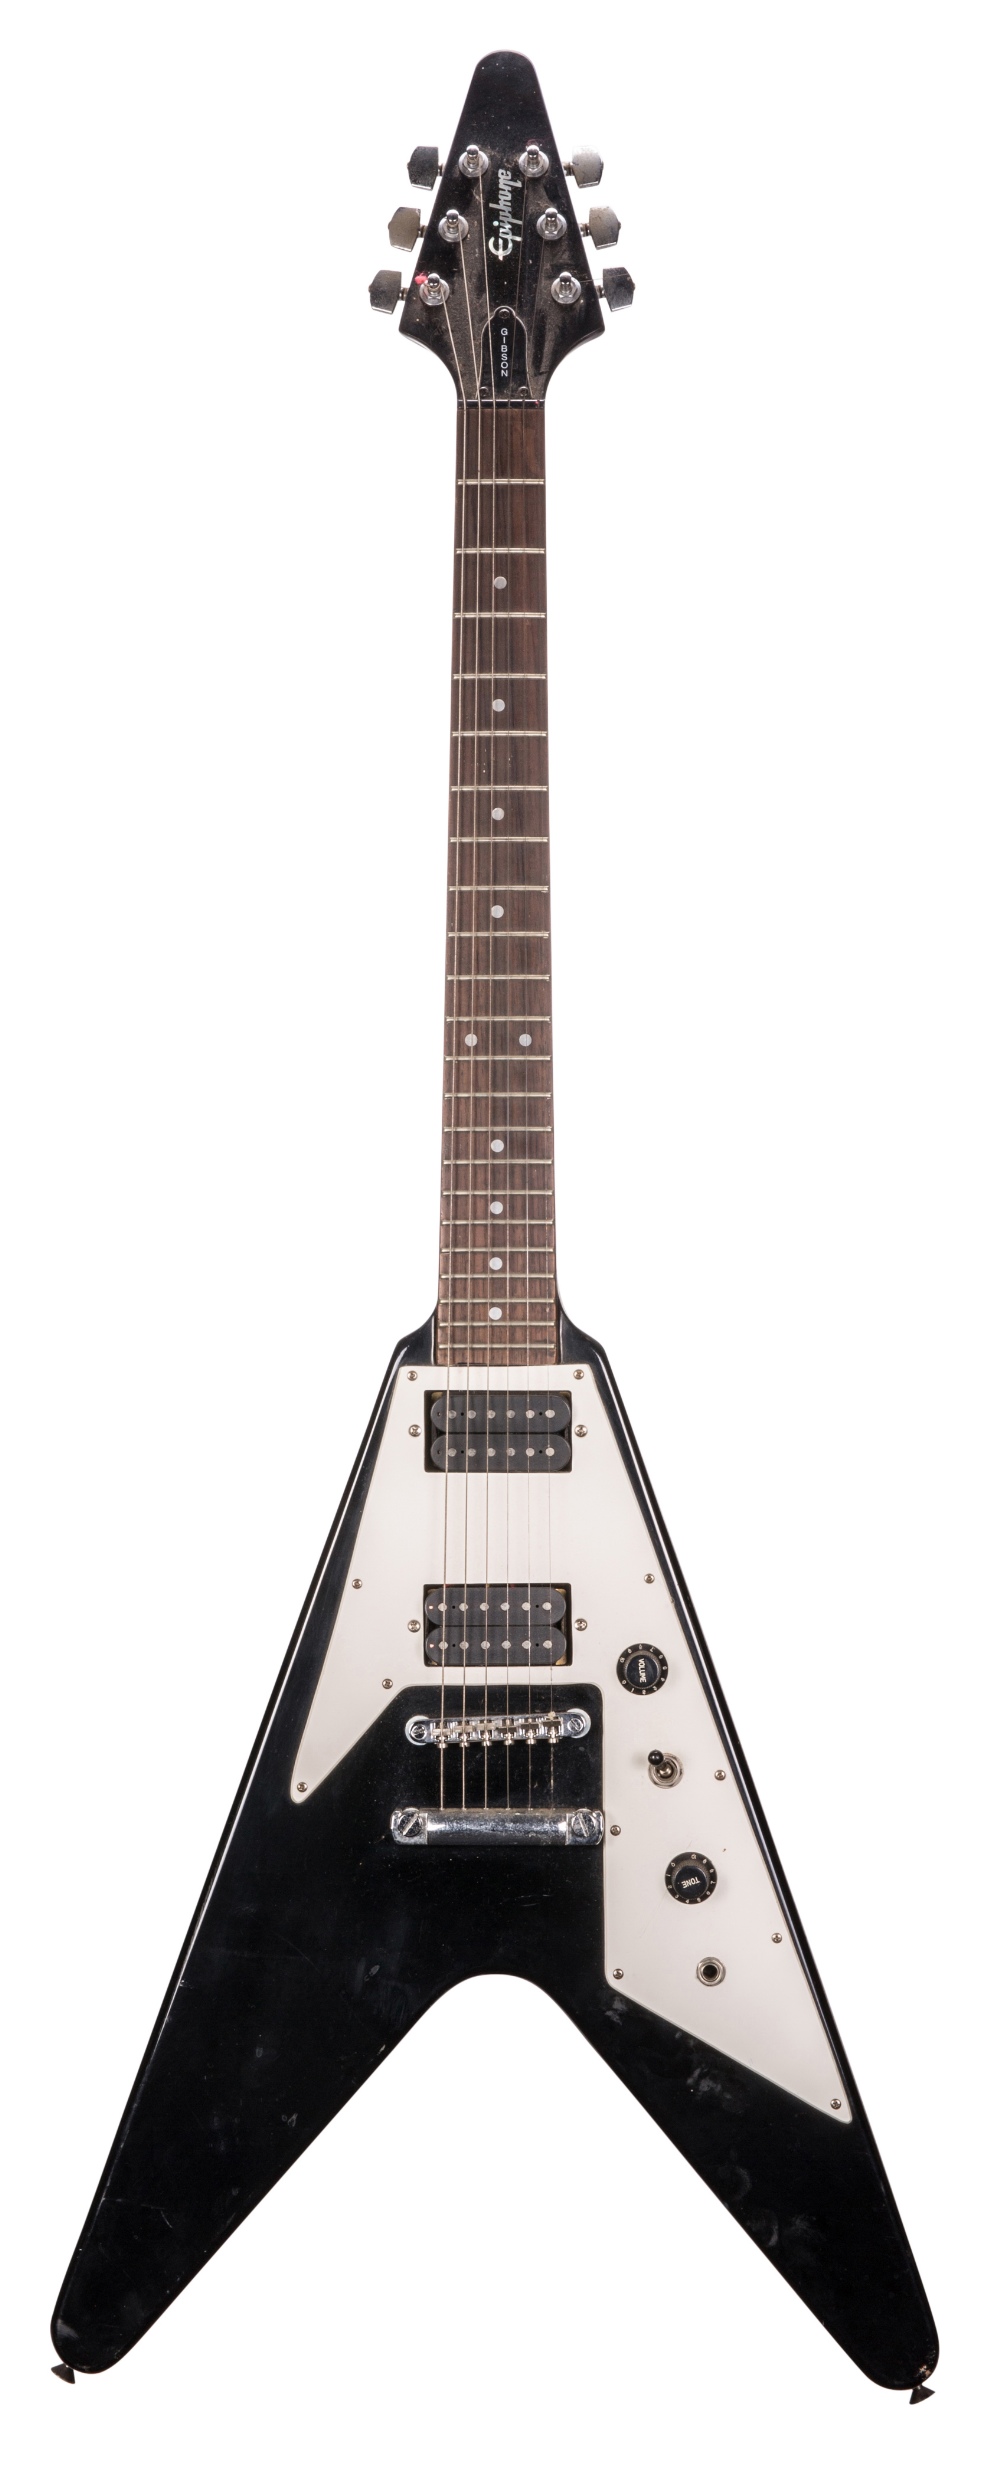 Pete Overend Watts (Mott the Hoople) - 1994 Epiphone Flying V electric guitar, made in Korea, ser.